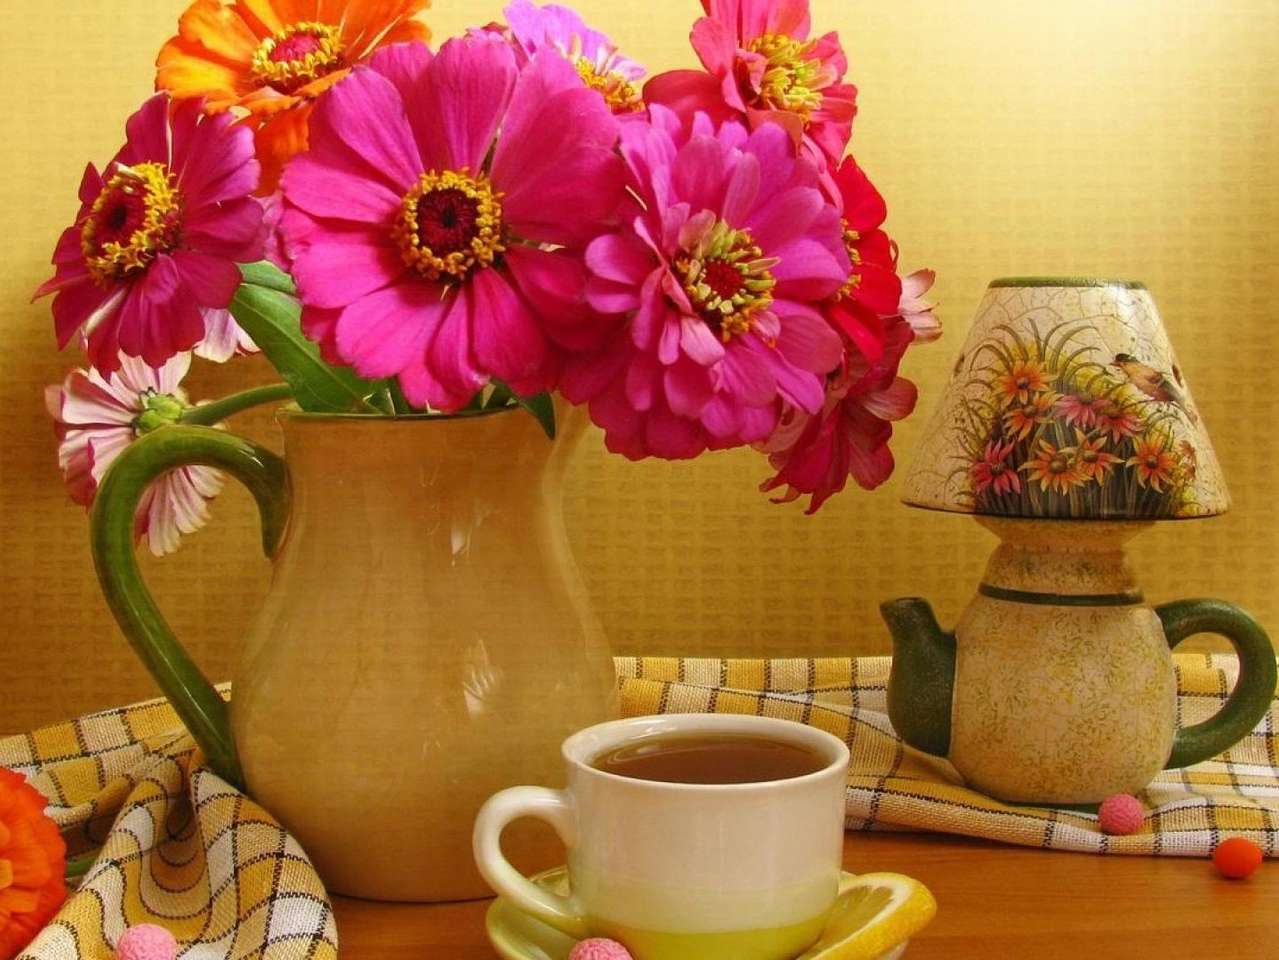 Flowers in a decorative jug online puzzle